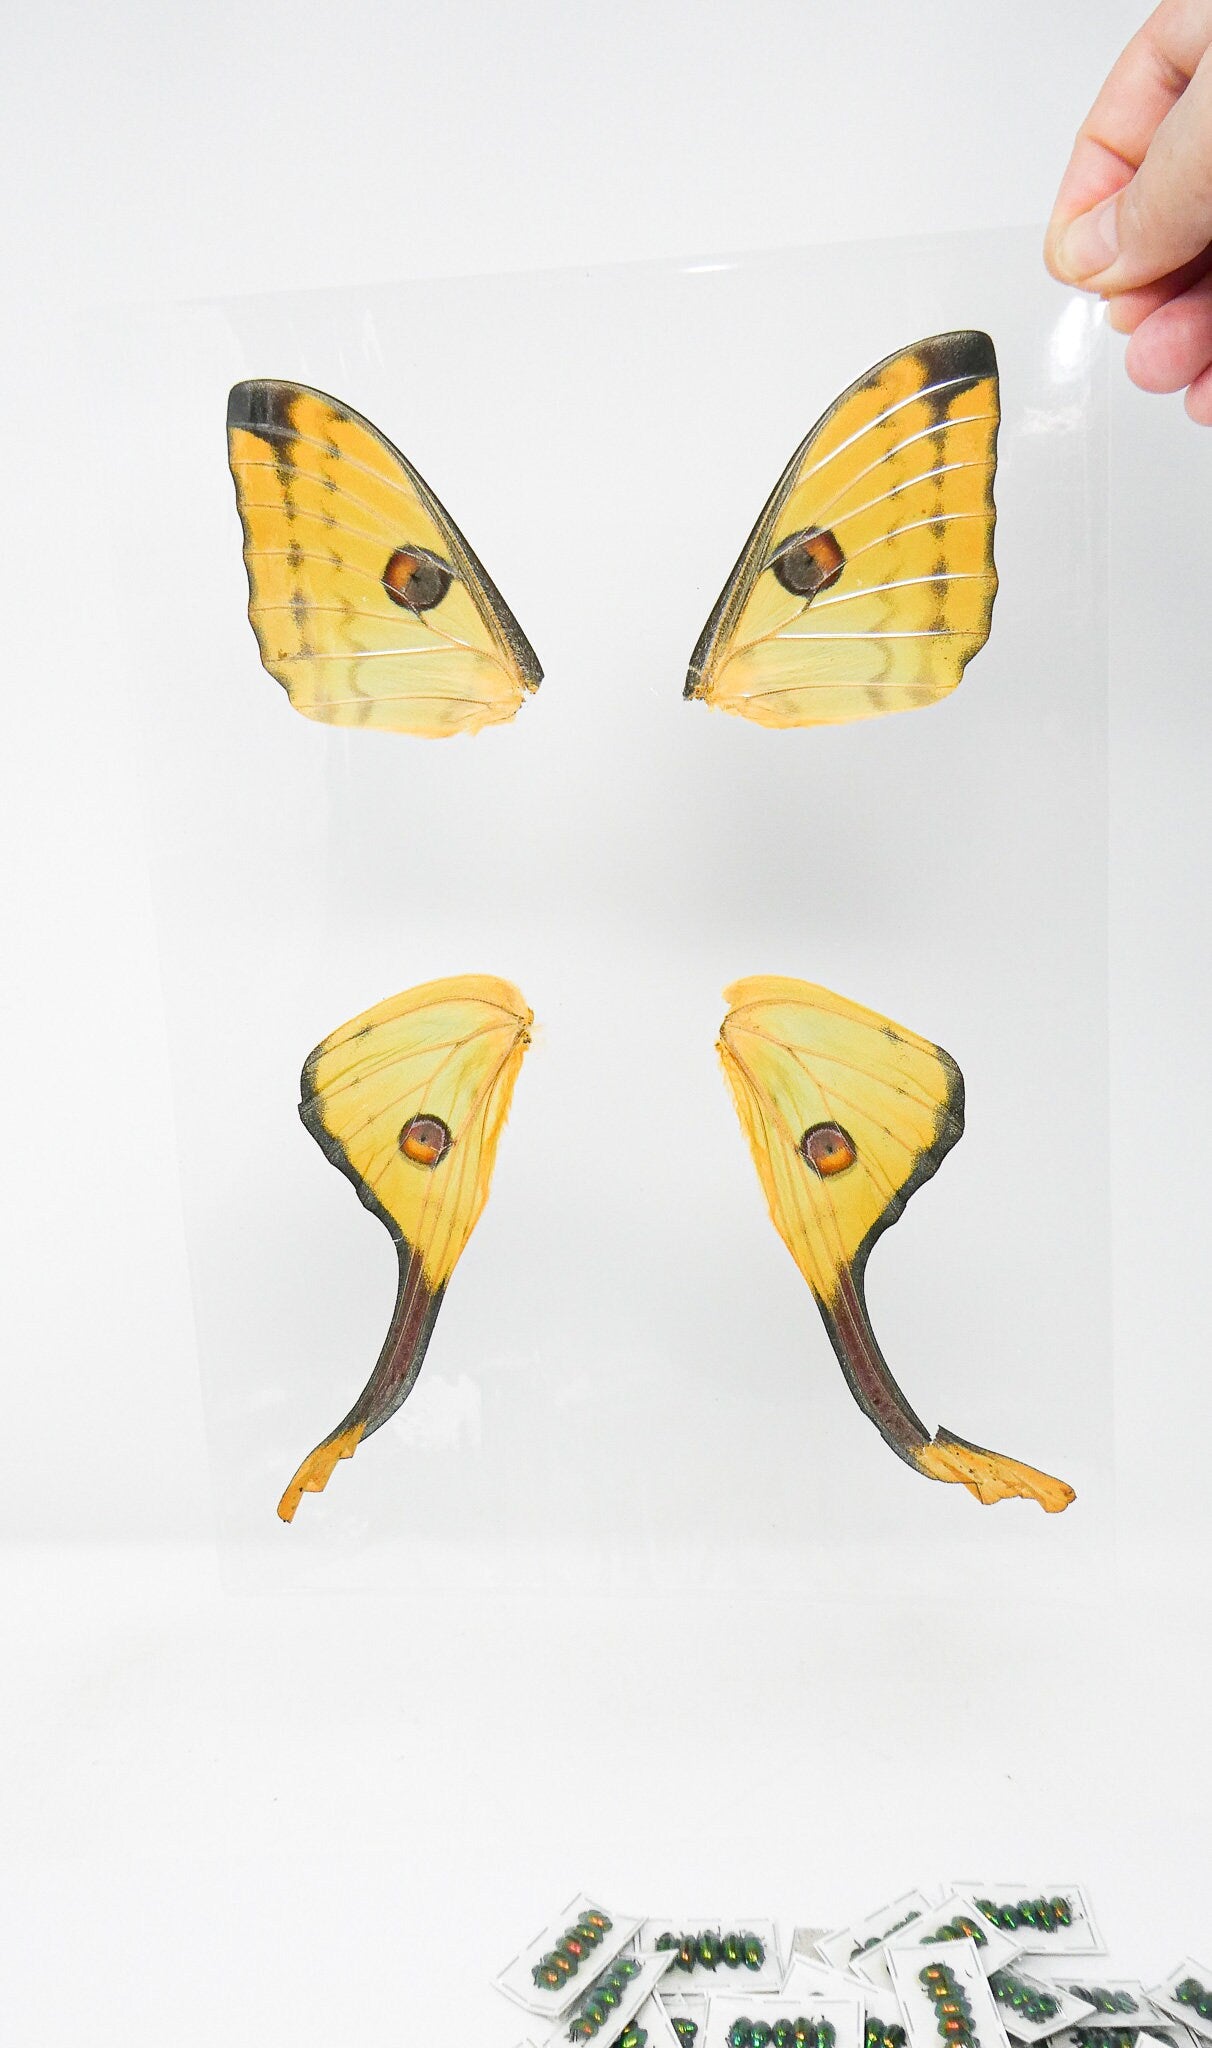 Laminated Madagascan Moon Moth Wings for Art and Craft Projects, Ethically Sourced Real Specimens